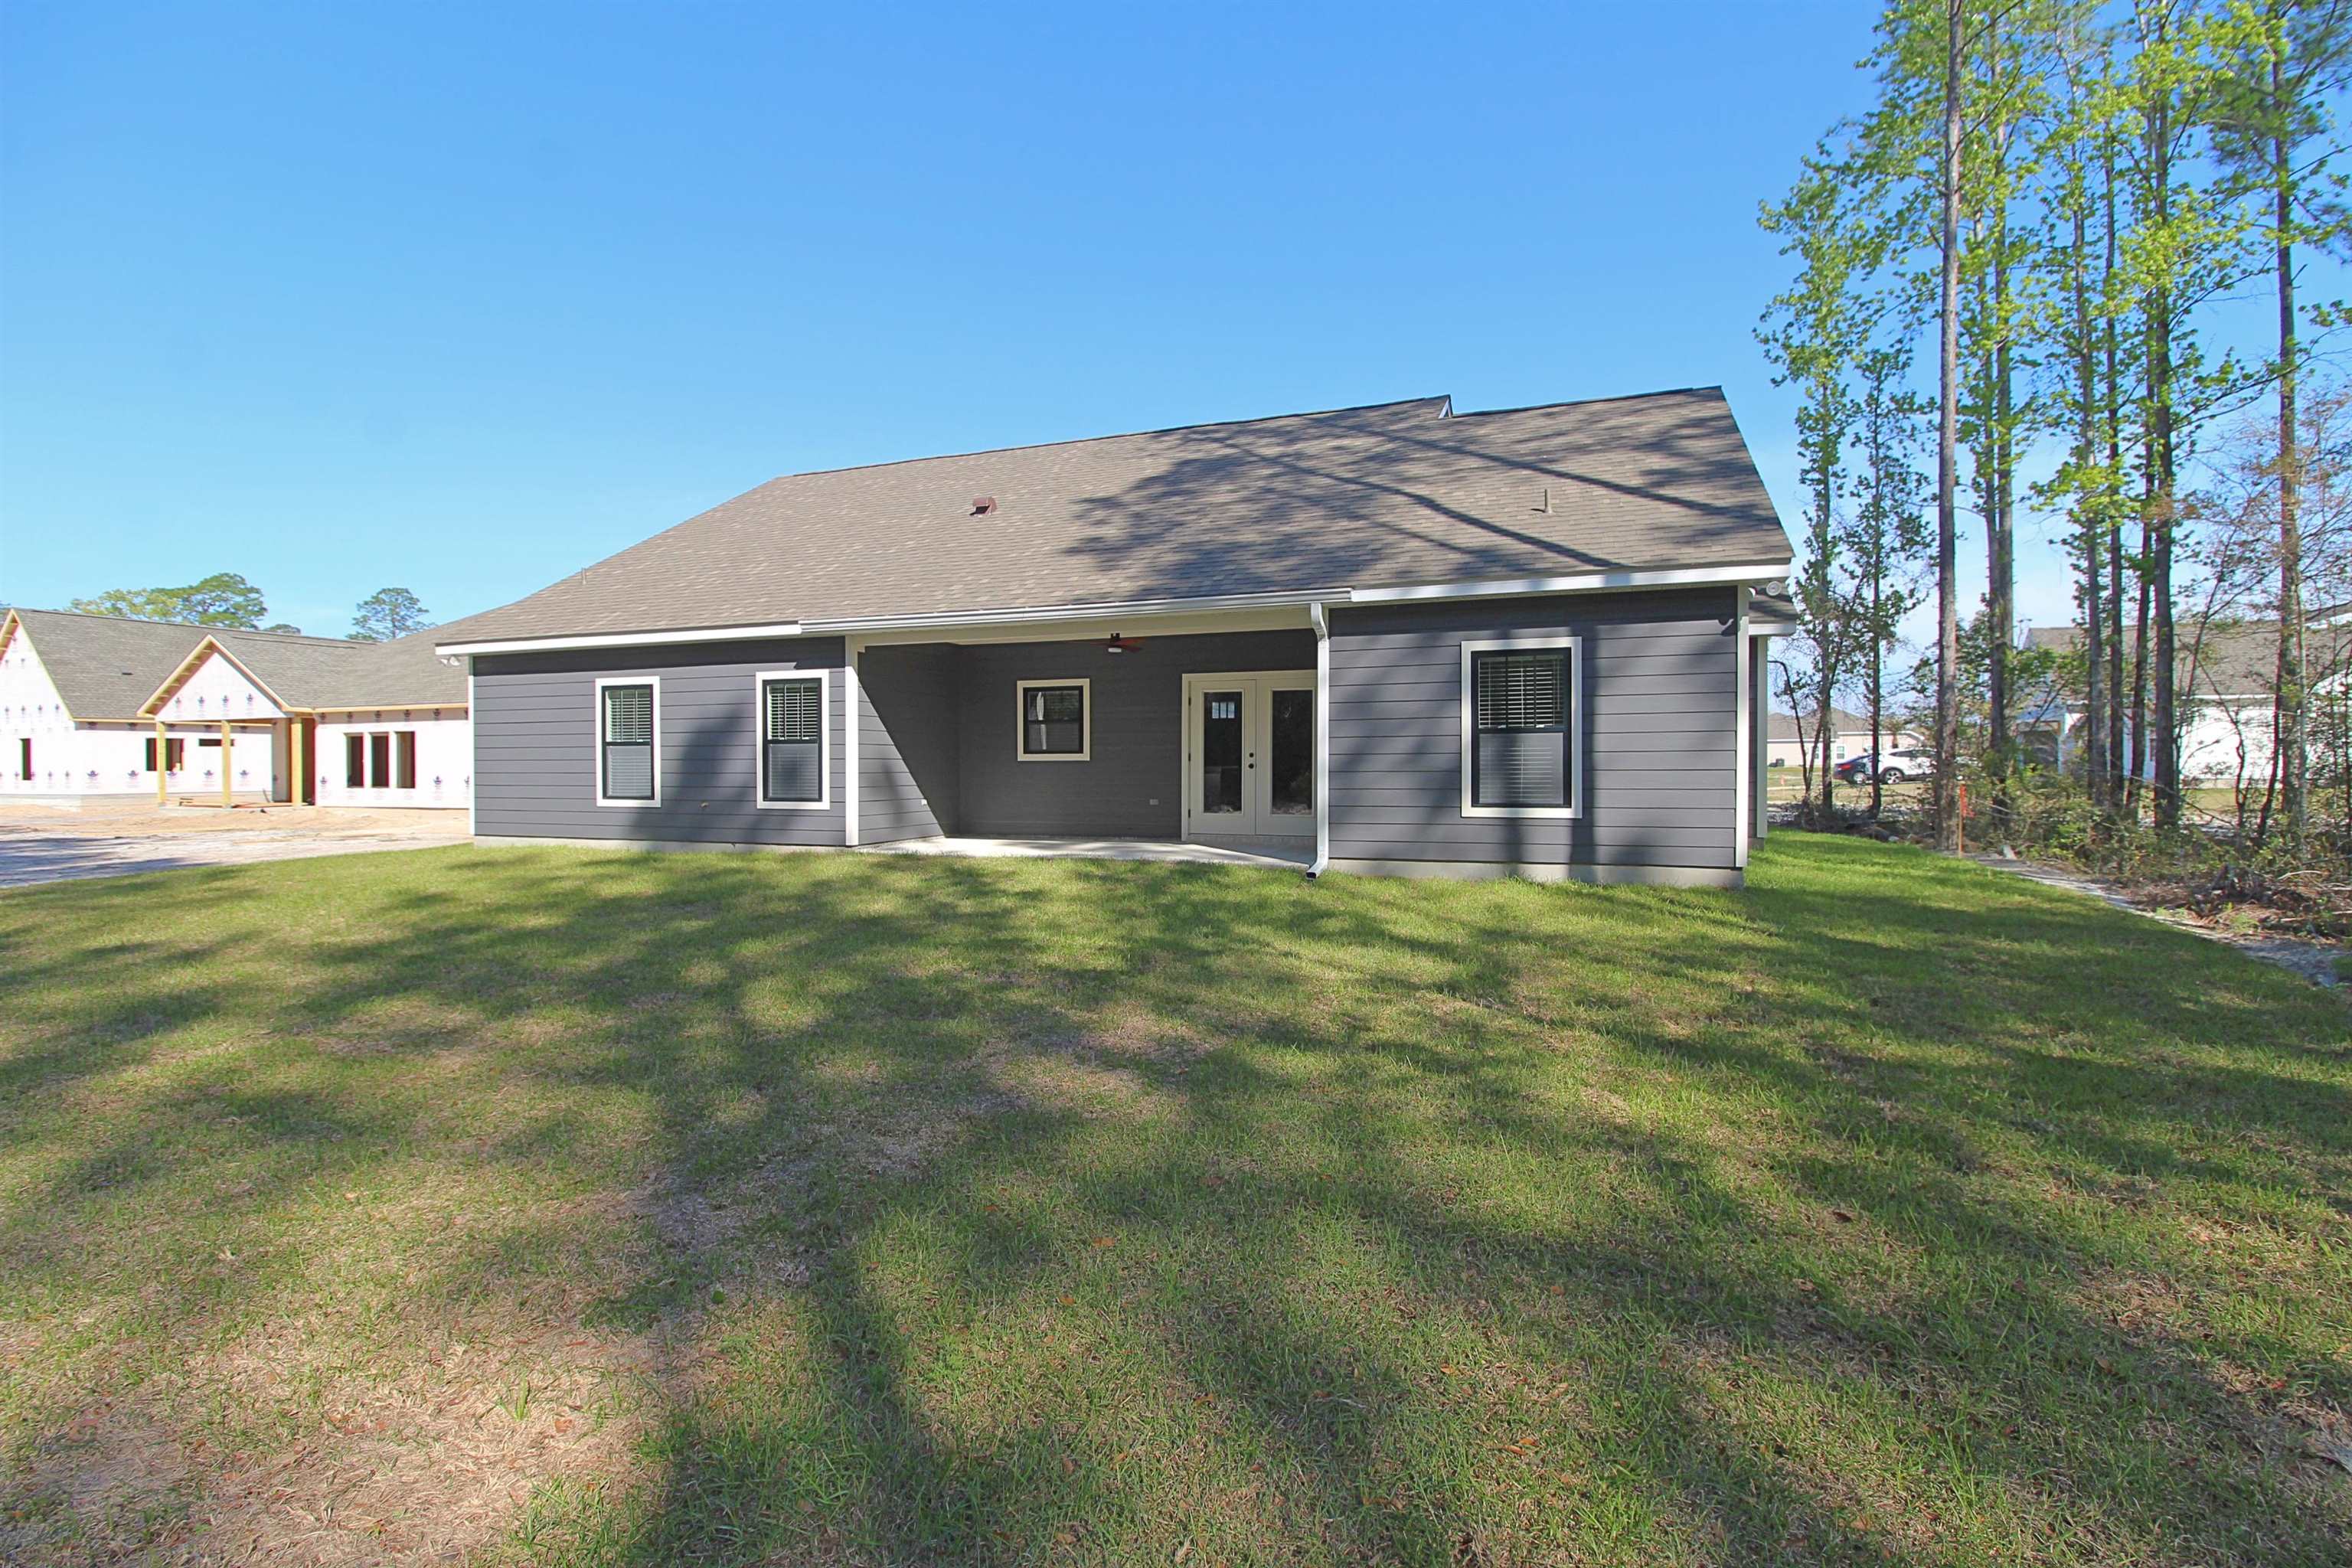 119 Shelby Drive,CRAWFORDVILLE,Florida 32327,3 Bedrooms Bedrooms,2 BathroomsBathrooms,Detached single family,119 Shelby Drive,369707